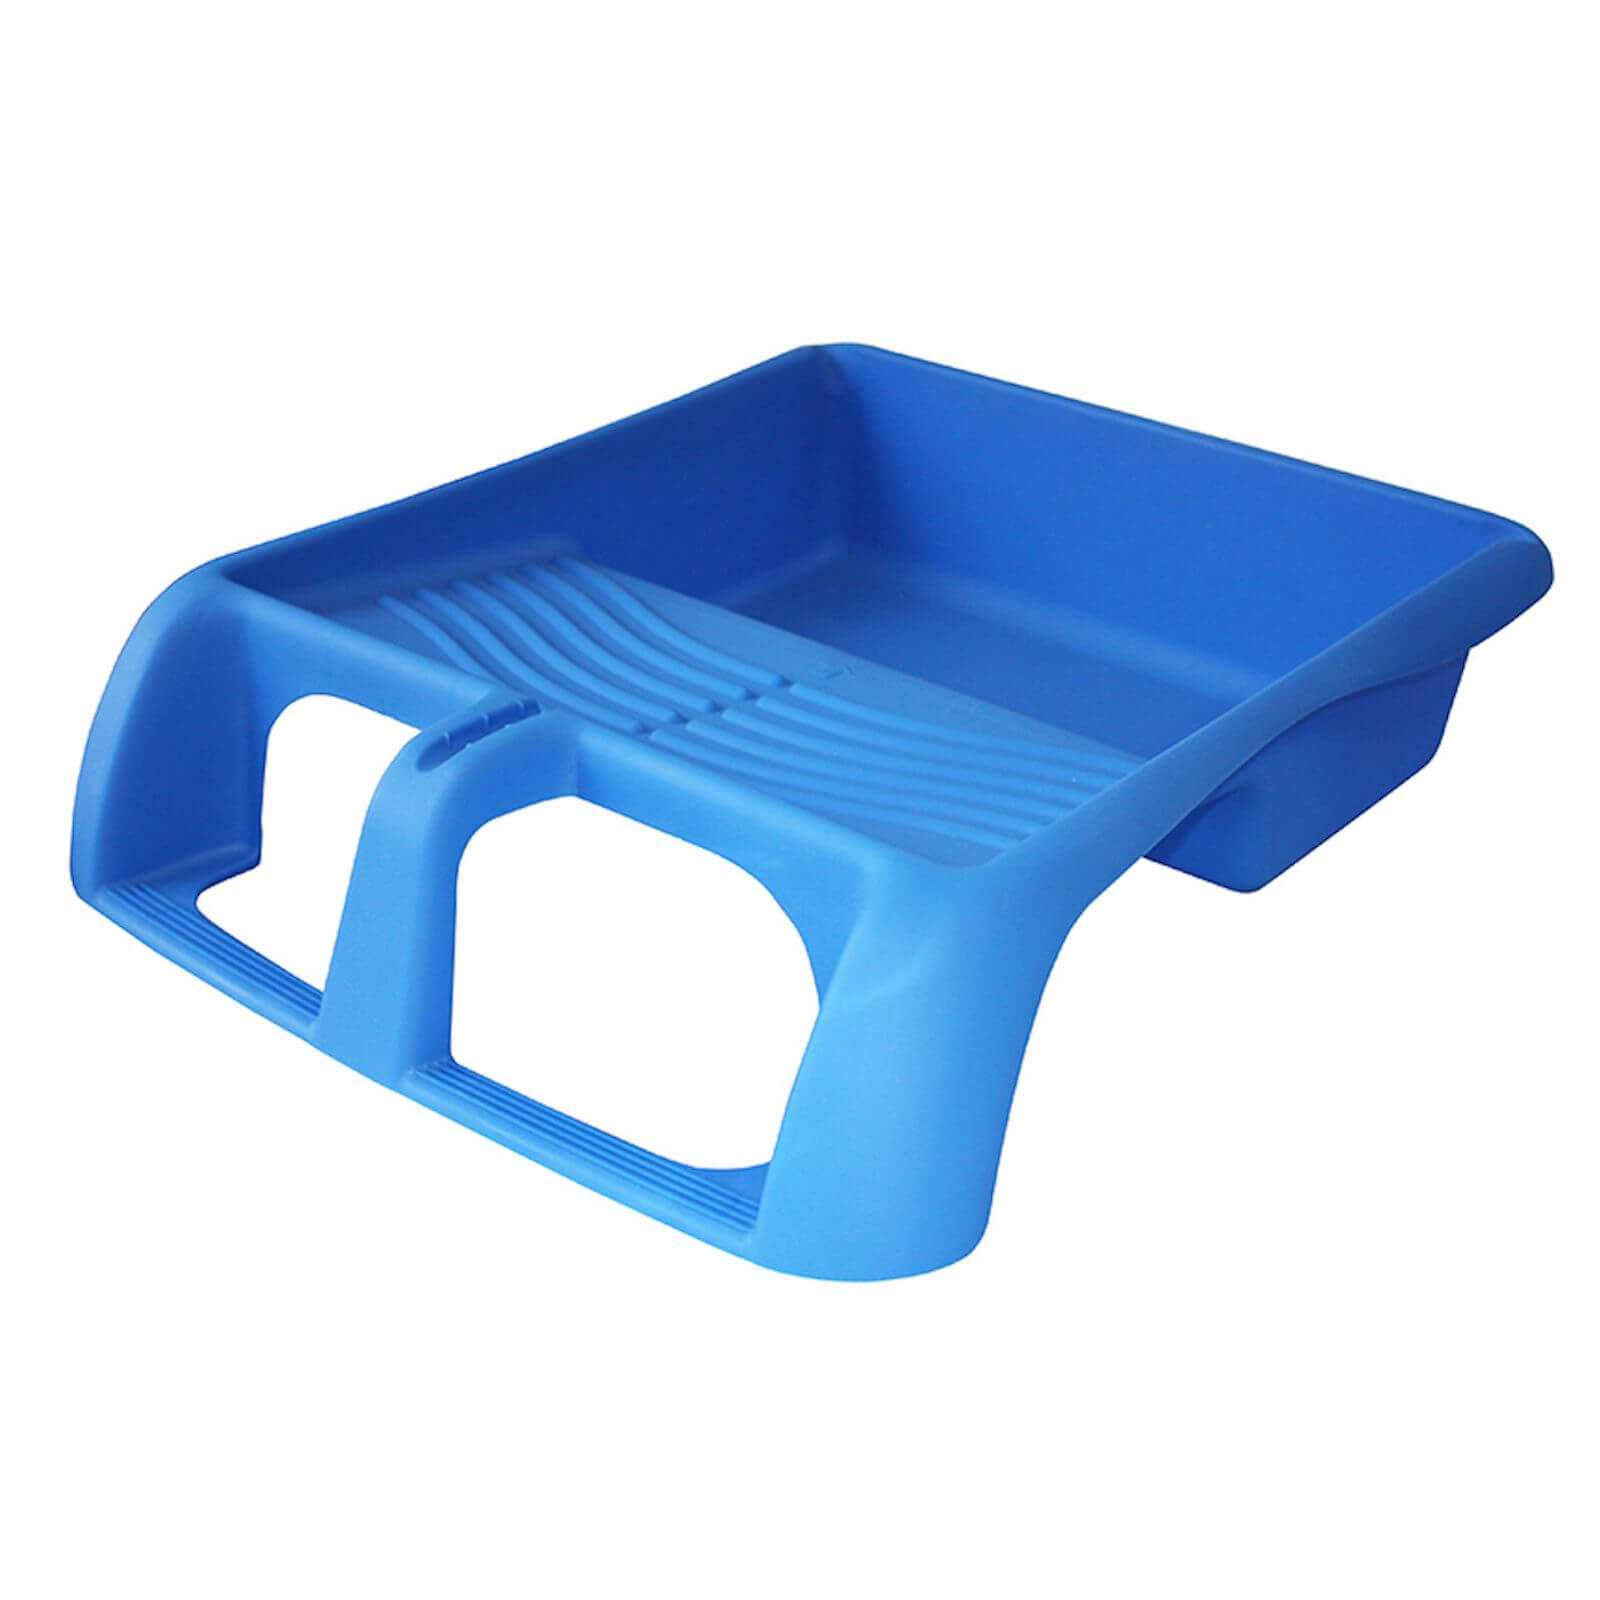 Monarch Paint Tray - 270mm